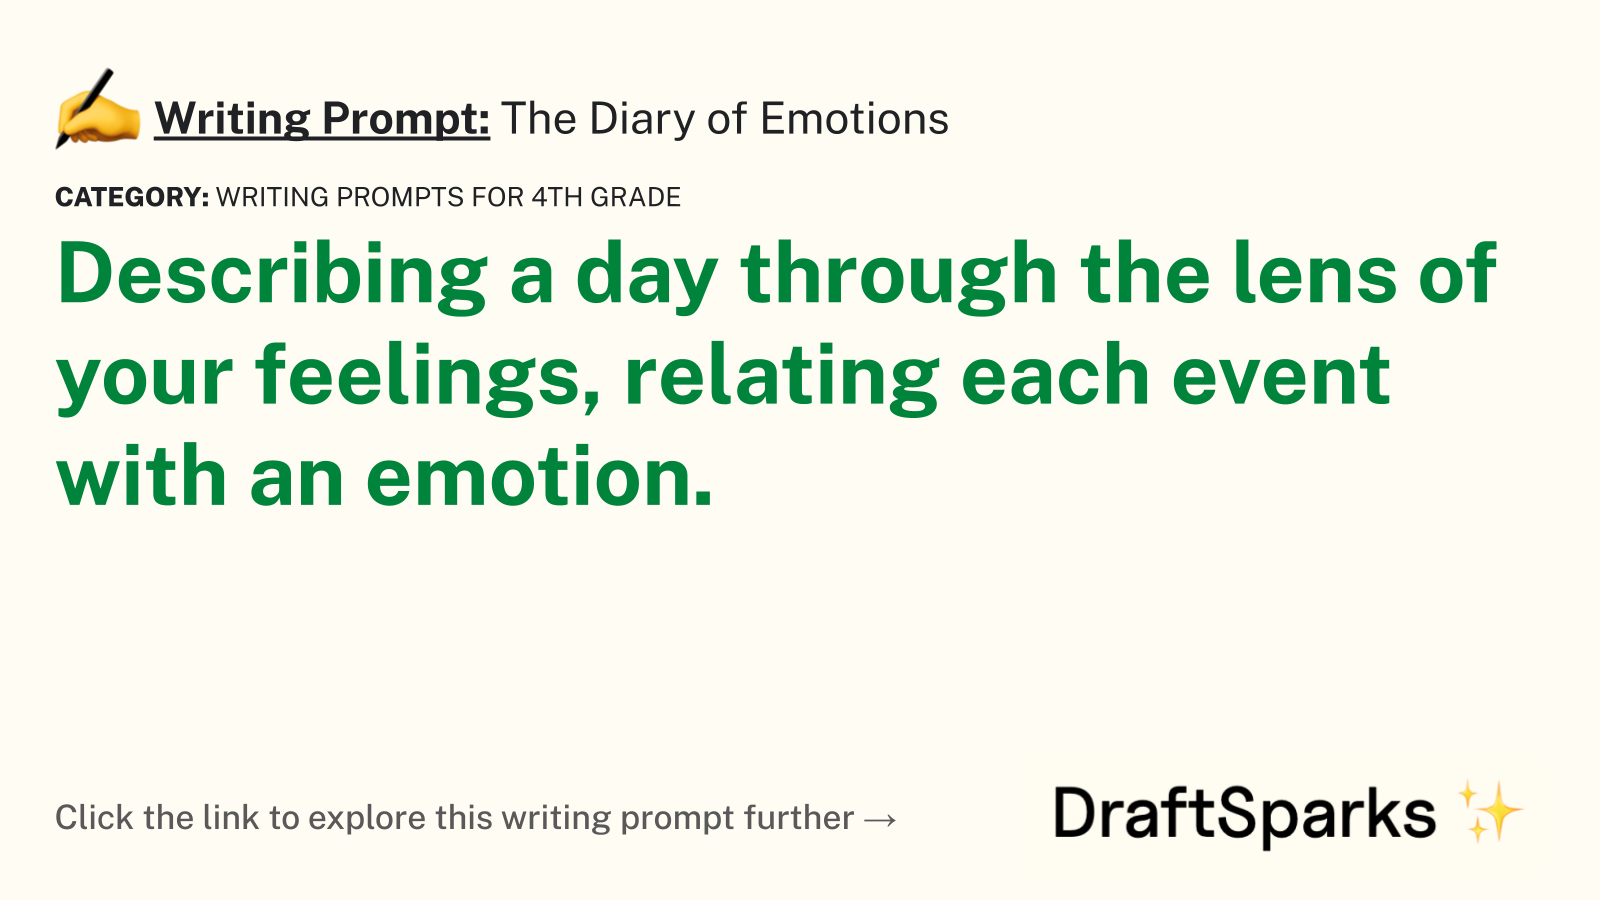 The Diary of Emotions